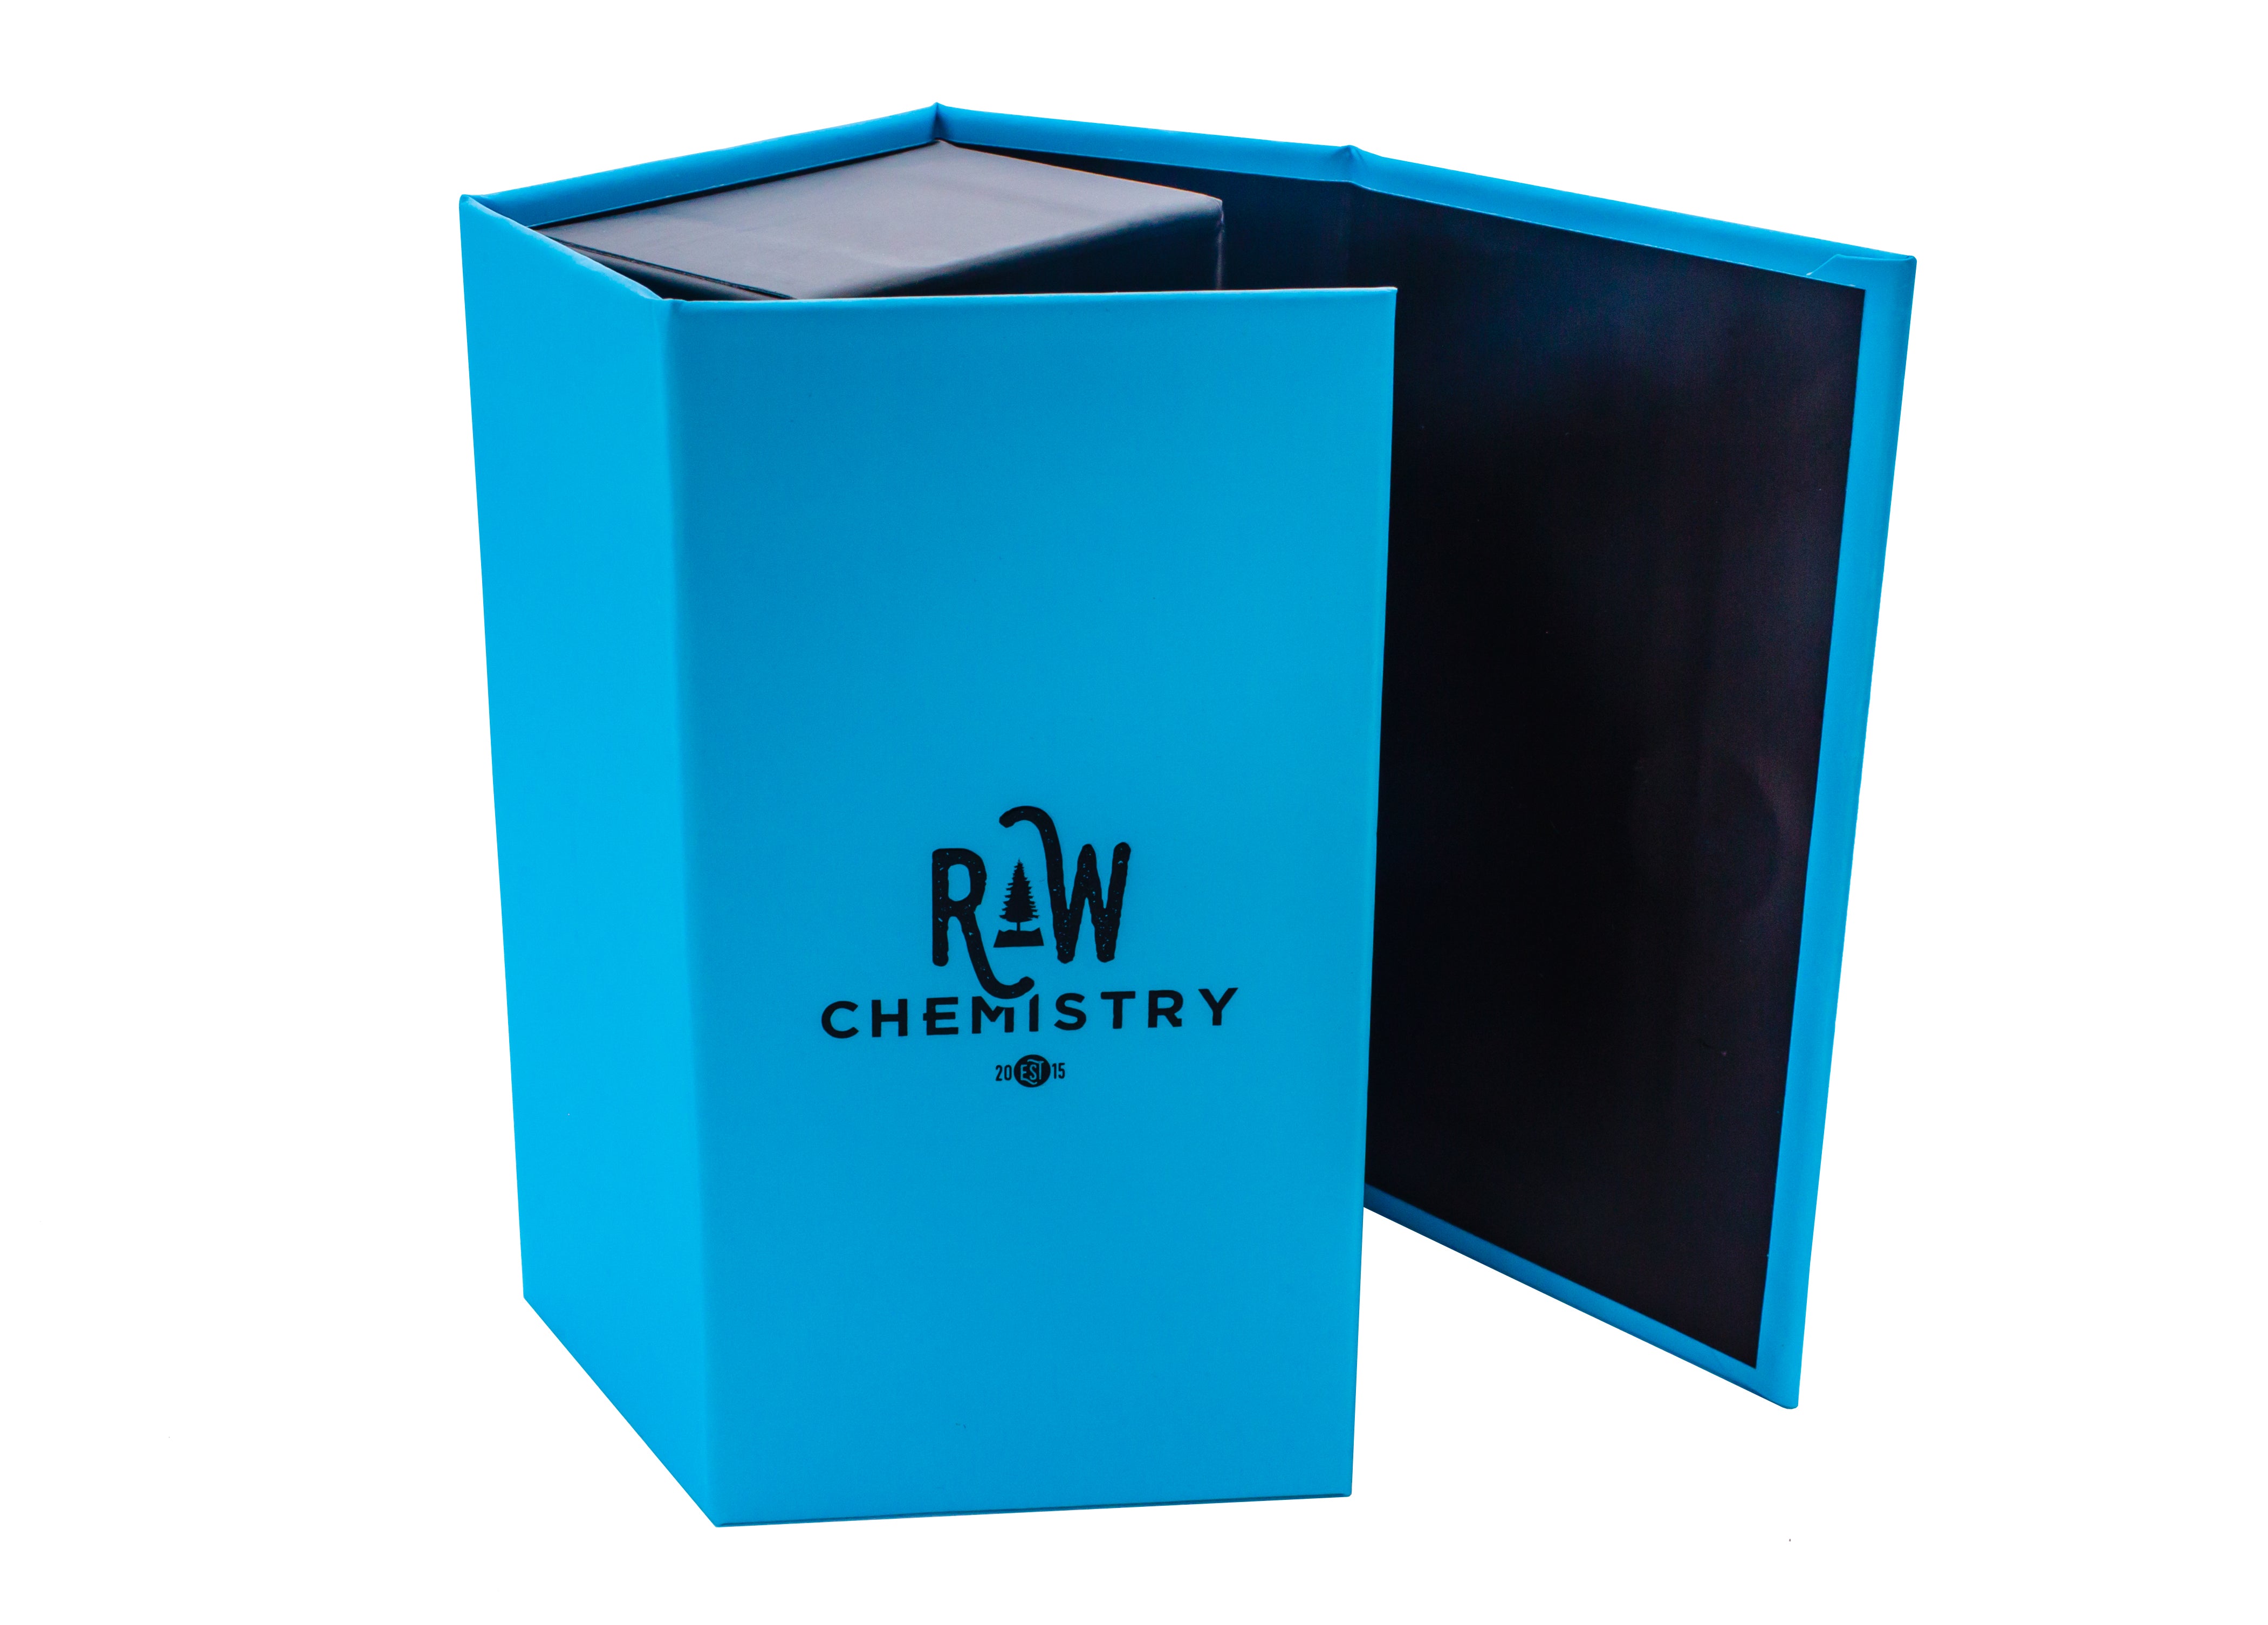 For Her by RawChemistry - A Pheromone Perfume Concentrate